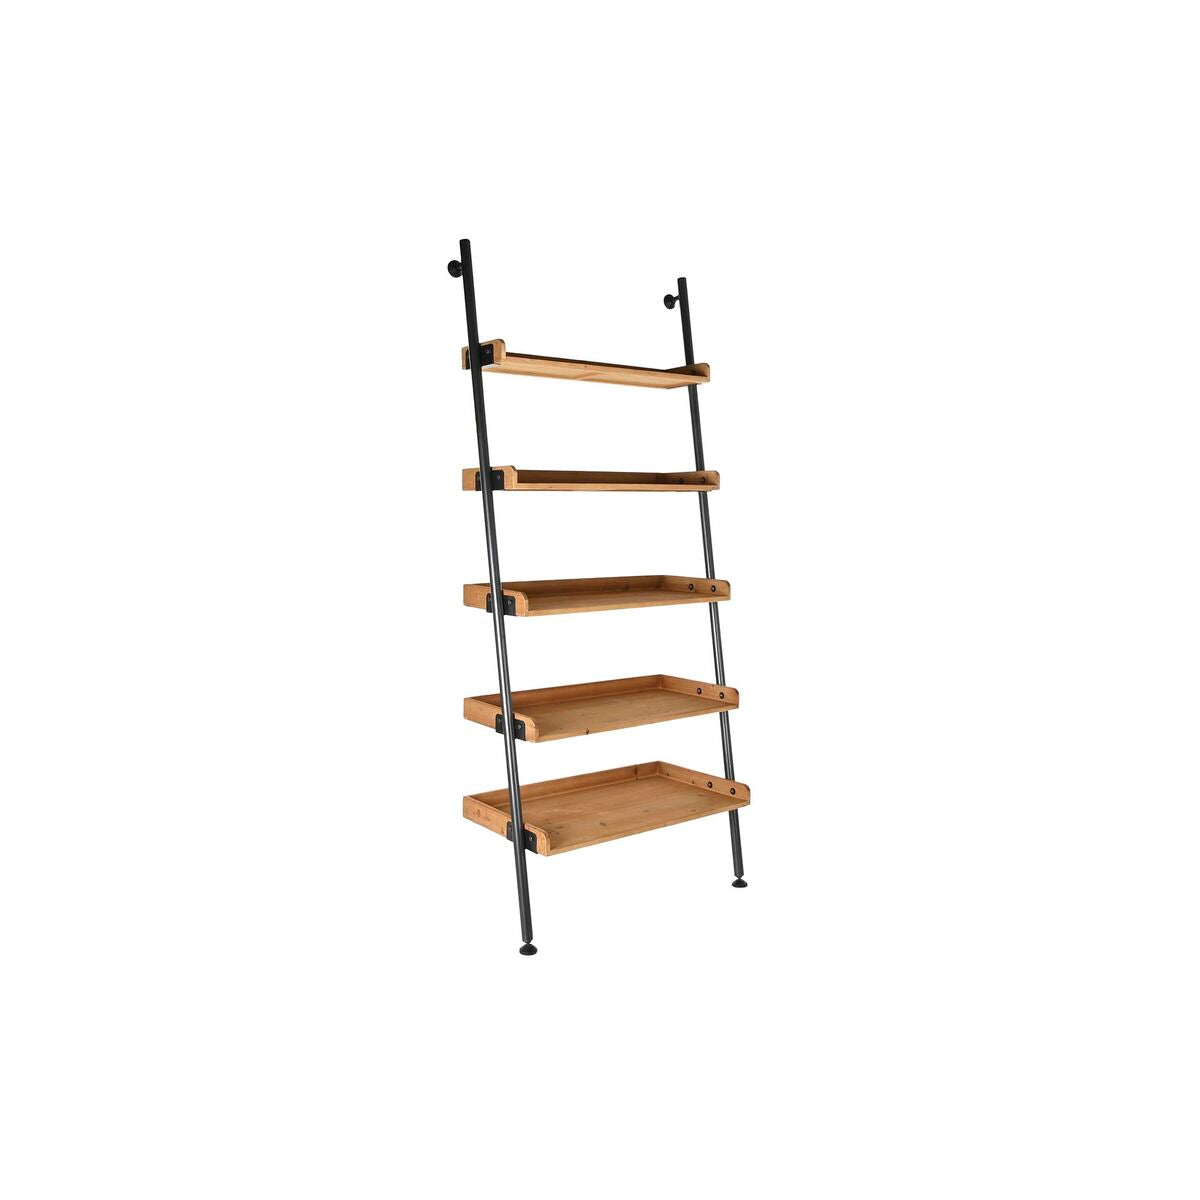 Shelving Unit in Wood and Black Metal Structure (86 x 45 x 200 cm)